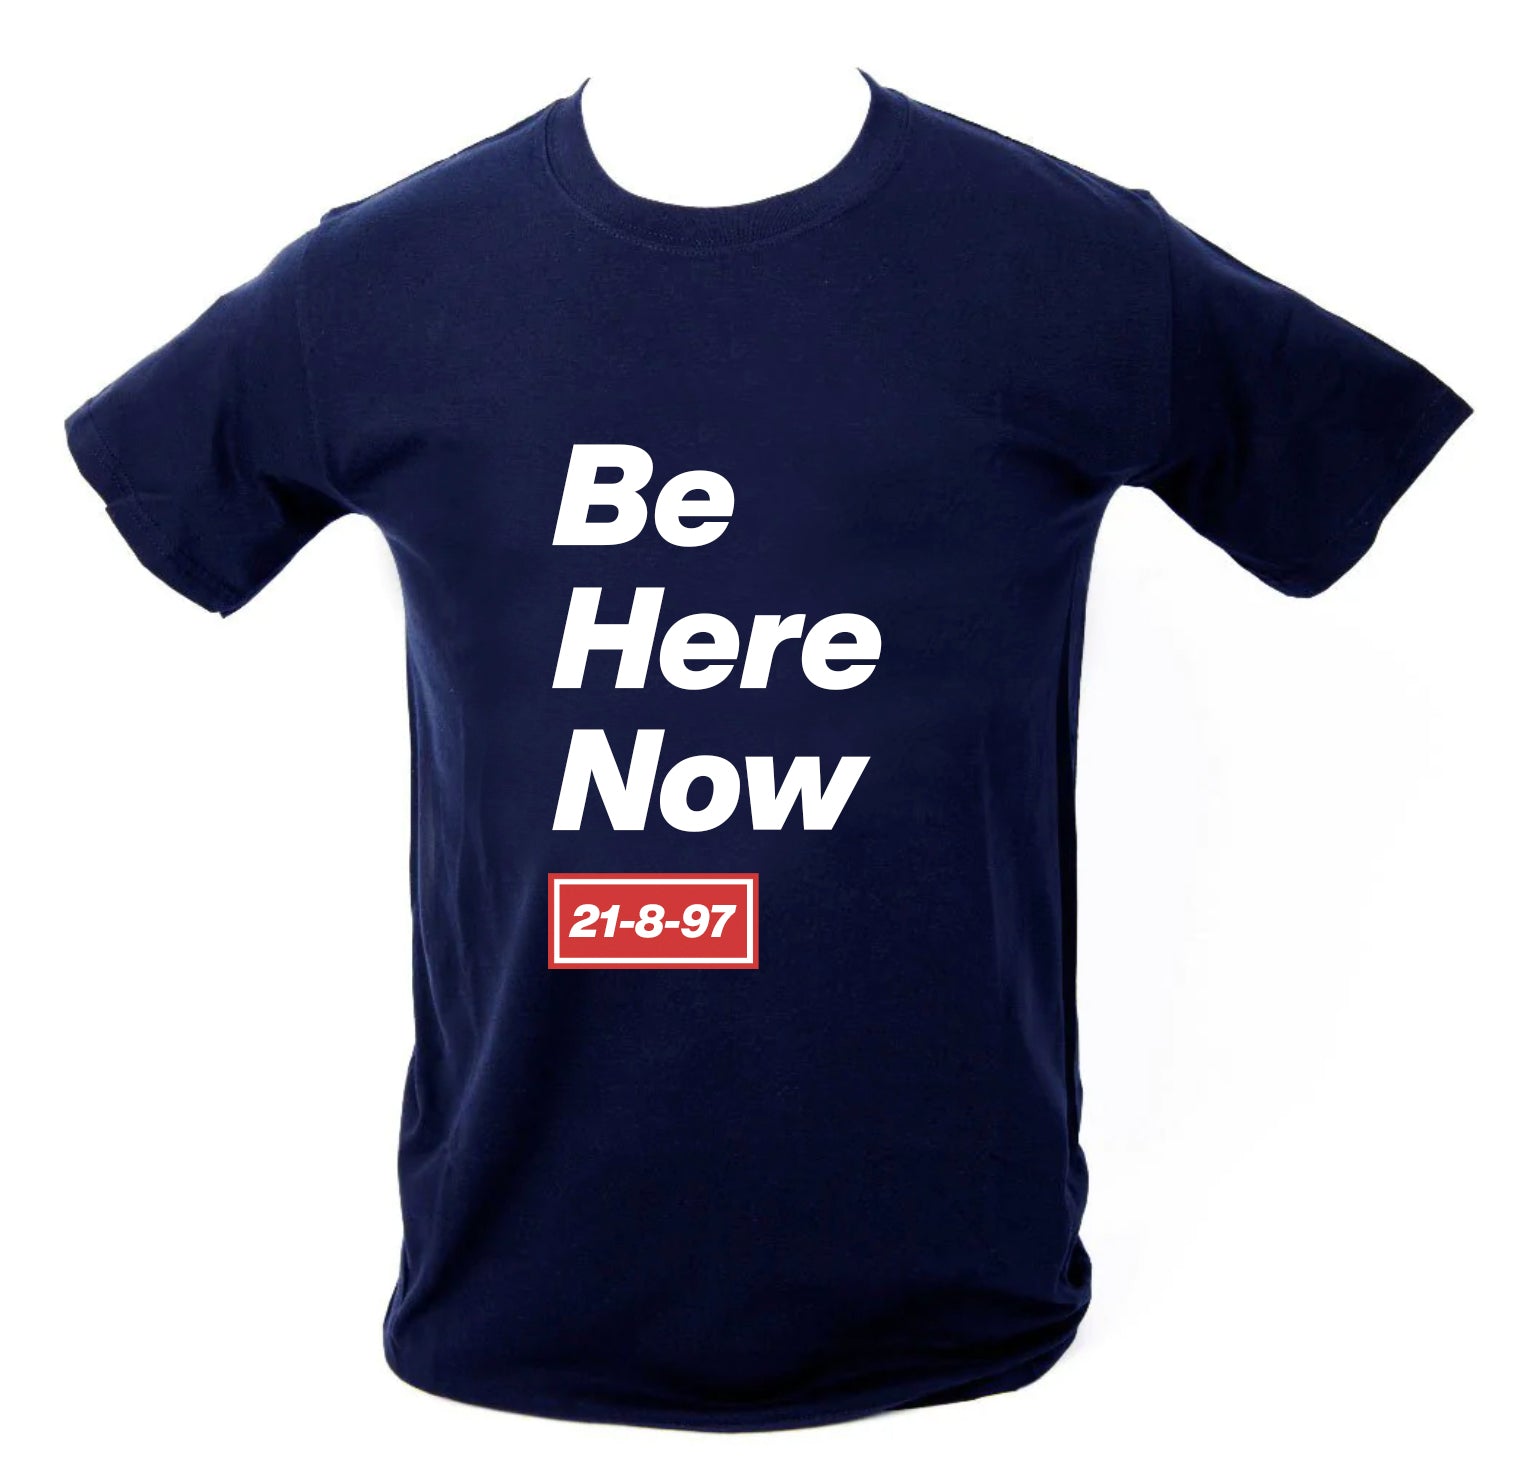 Oasis - Be Here Now - T Shirt - New Item